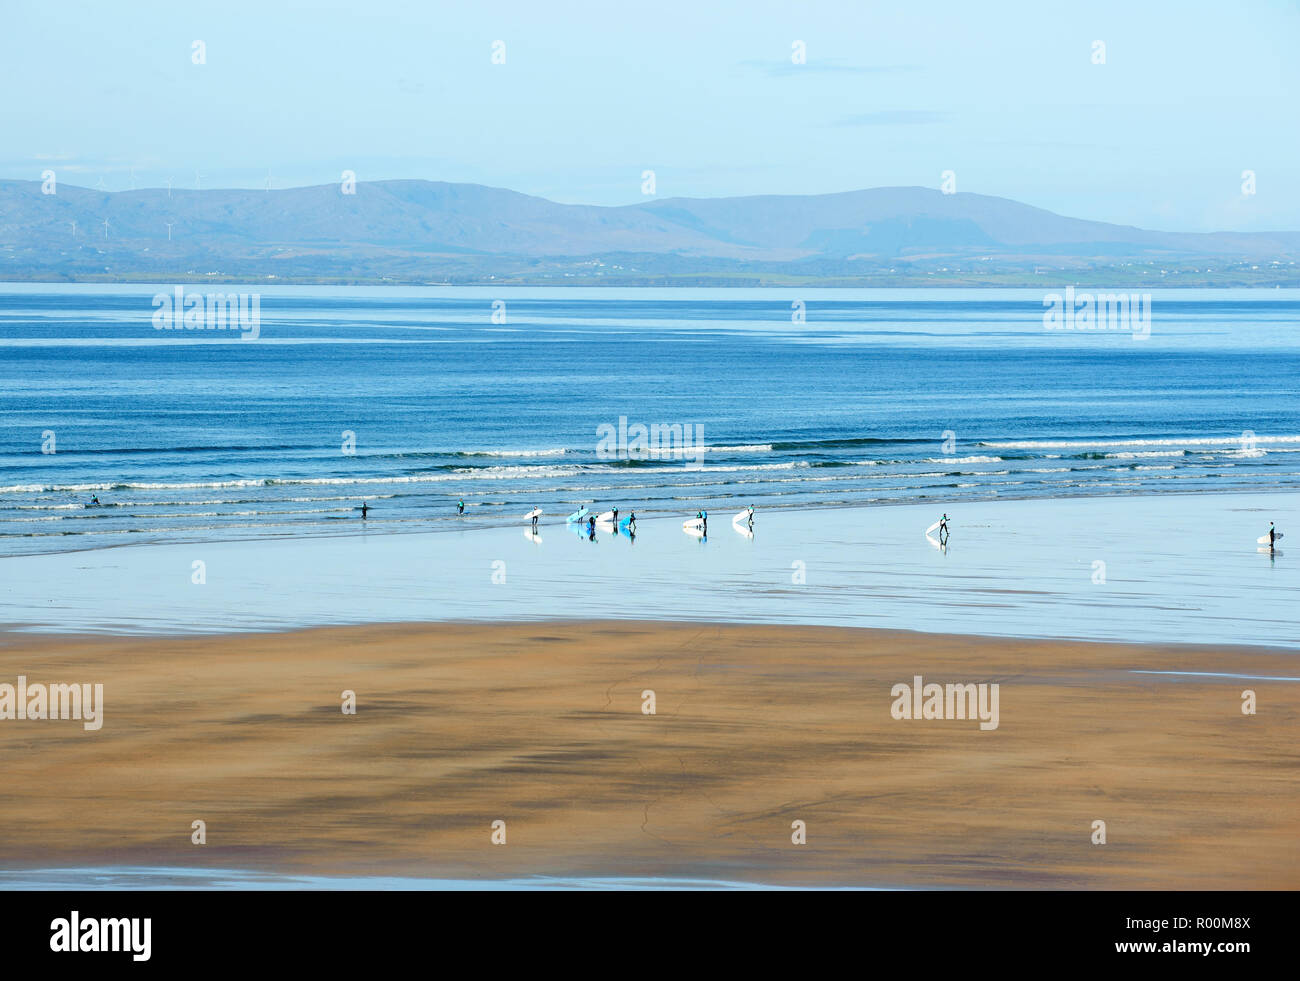 Magnificent sandy beach,Tullan Strand, which attracts surfers from all over Ireland and Europe Stock Photo